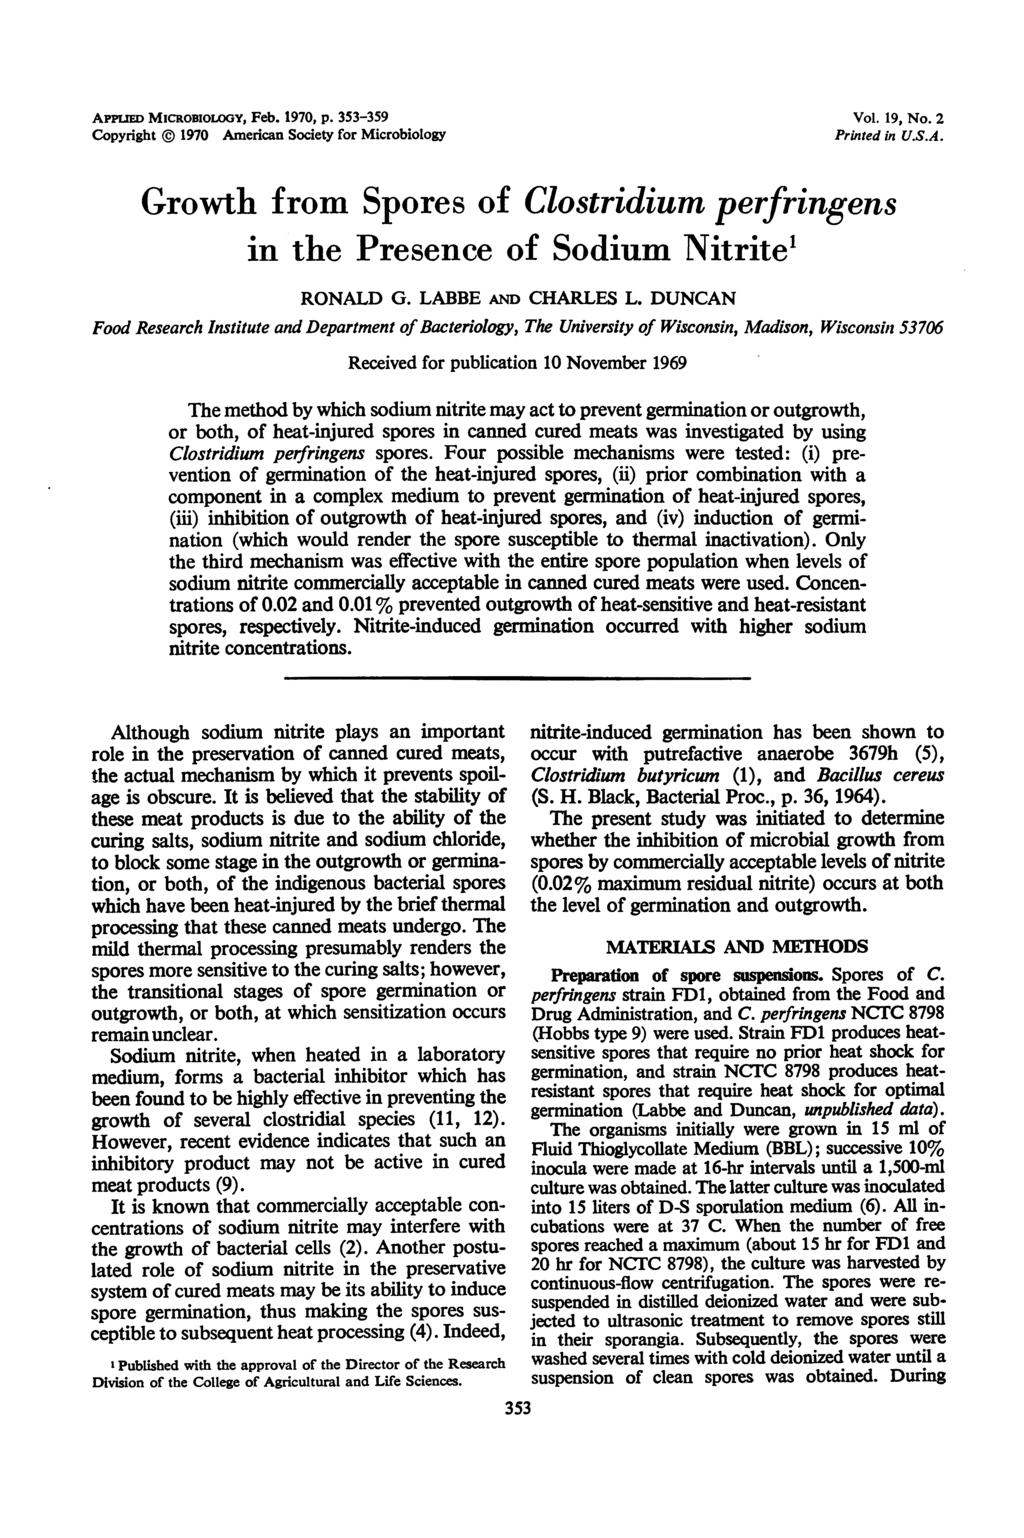 APpuE MicRoBioLOGY, Feb. 1970, p. 353-359 Copyright 1970 American Society for Microbiology Vol. 19, No. 2 Printed in U.S.A. Growth from Spores of Clostridium perfringens in the Presence of Sodium Nitrite' RONALD G.